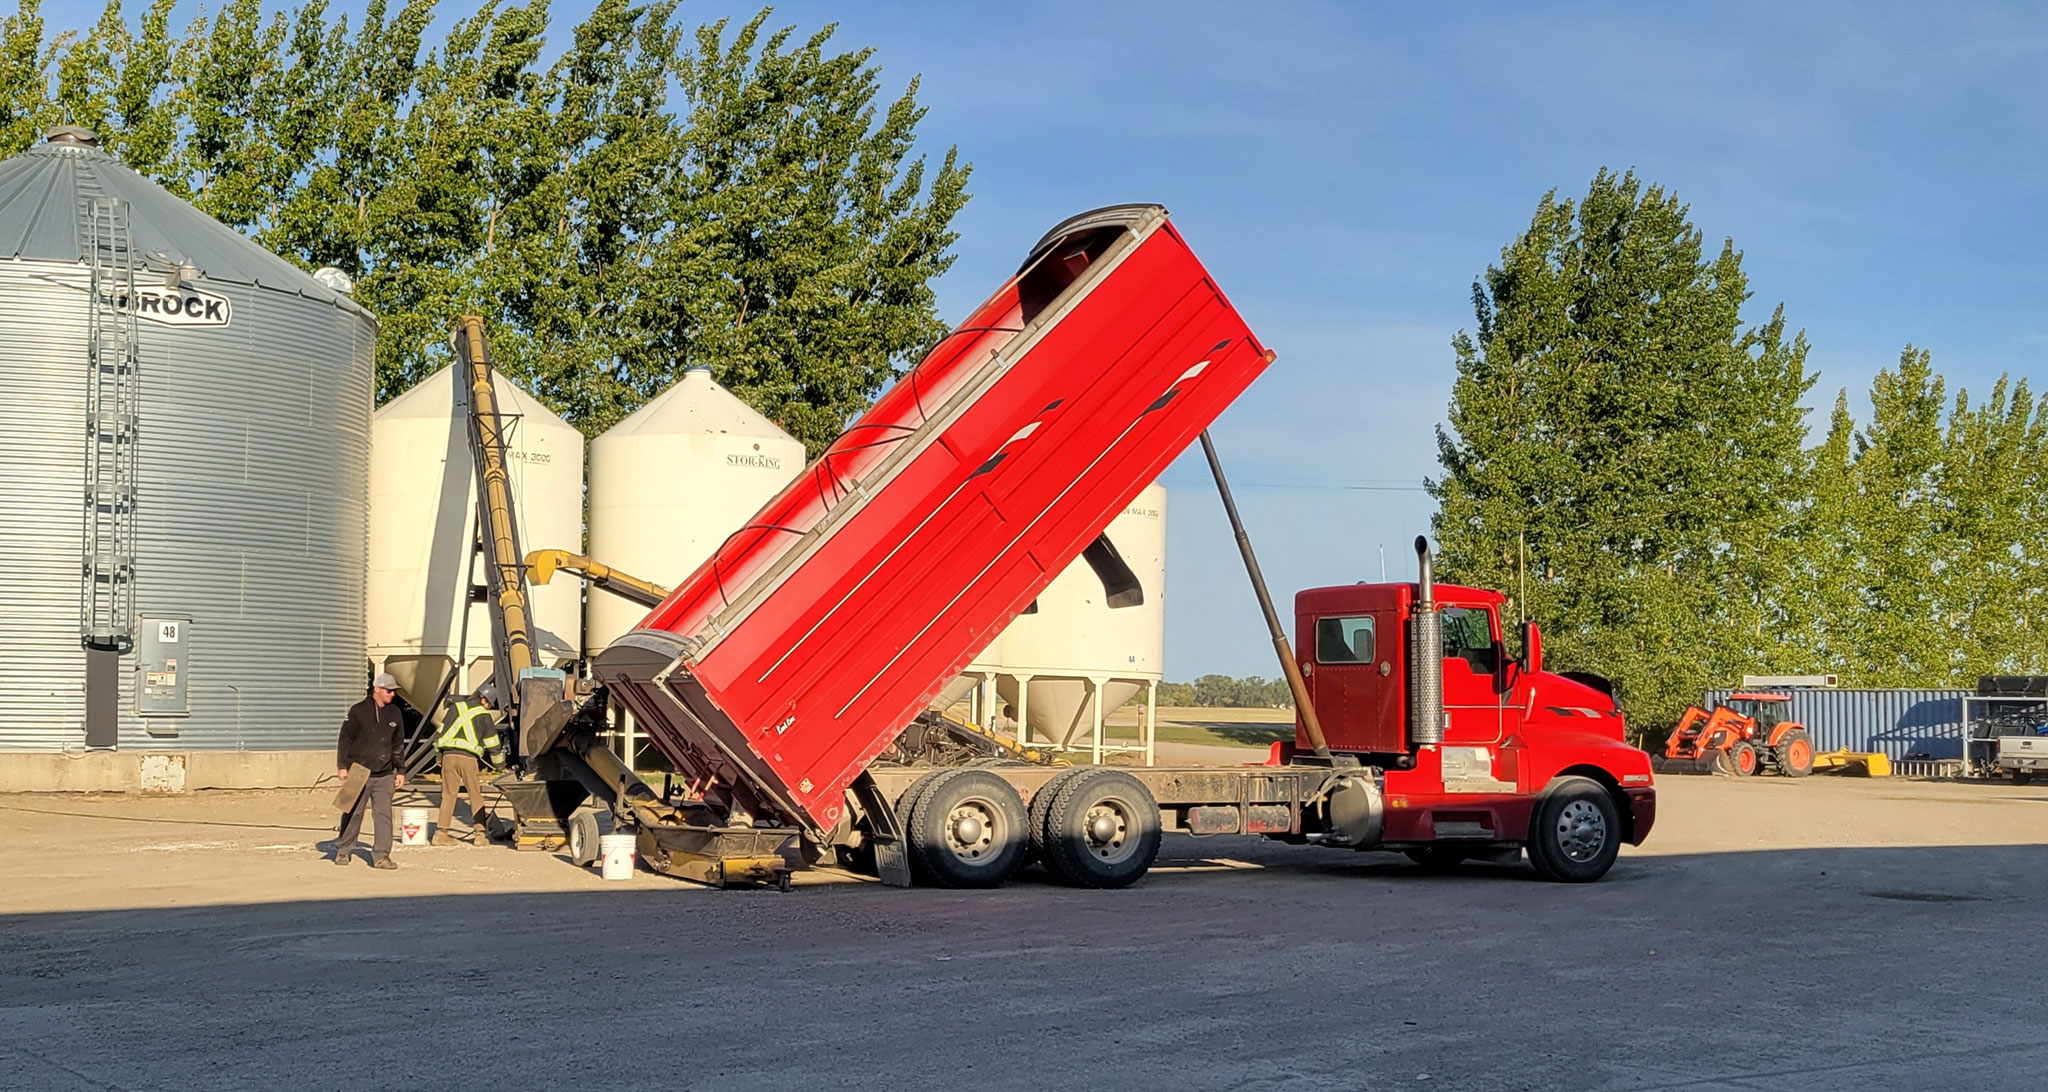 Photo of a truck at a receiving station unloading their beans.